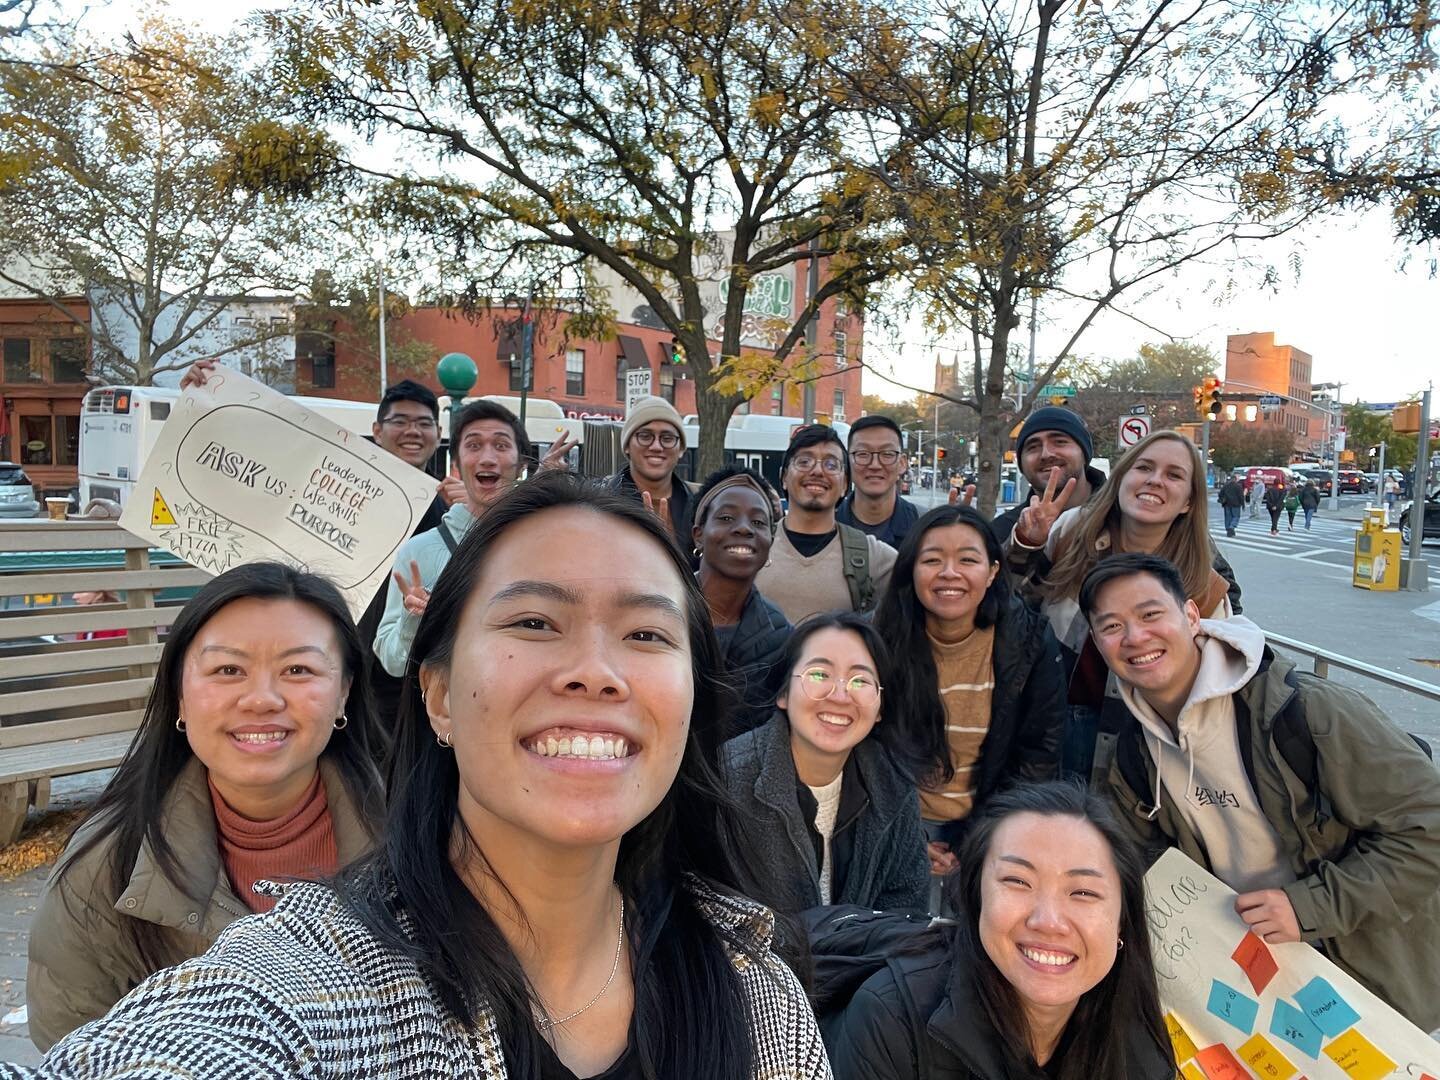 ✈️this past week, some of our mentors went to NYC to try to share the gospel with people! ➡️check out what happened and ask them about it! join us next time ✌️